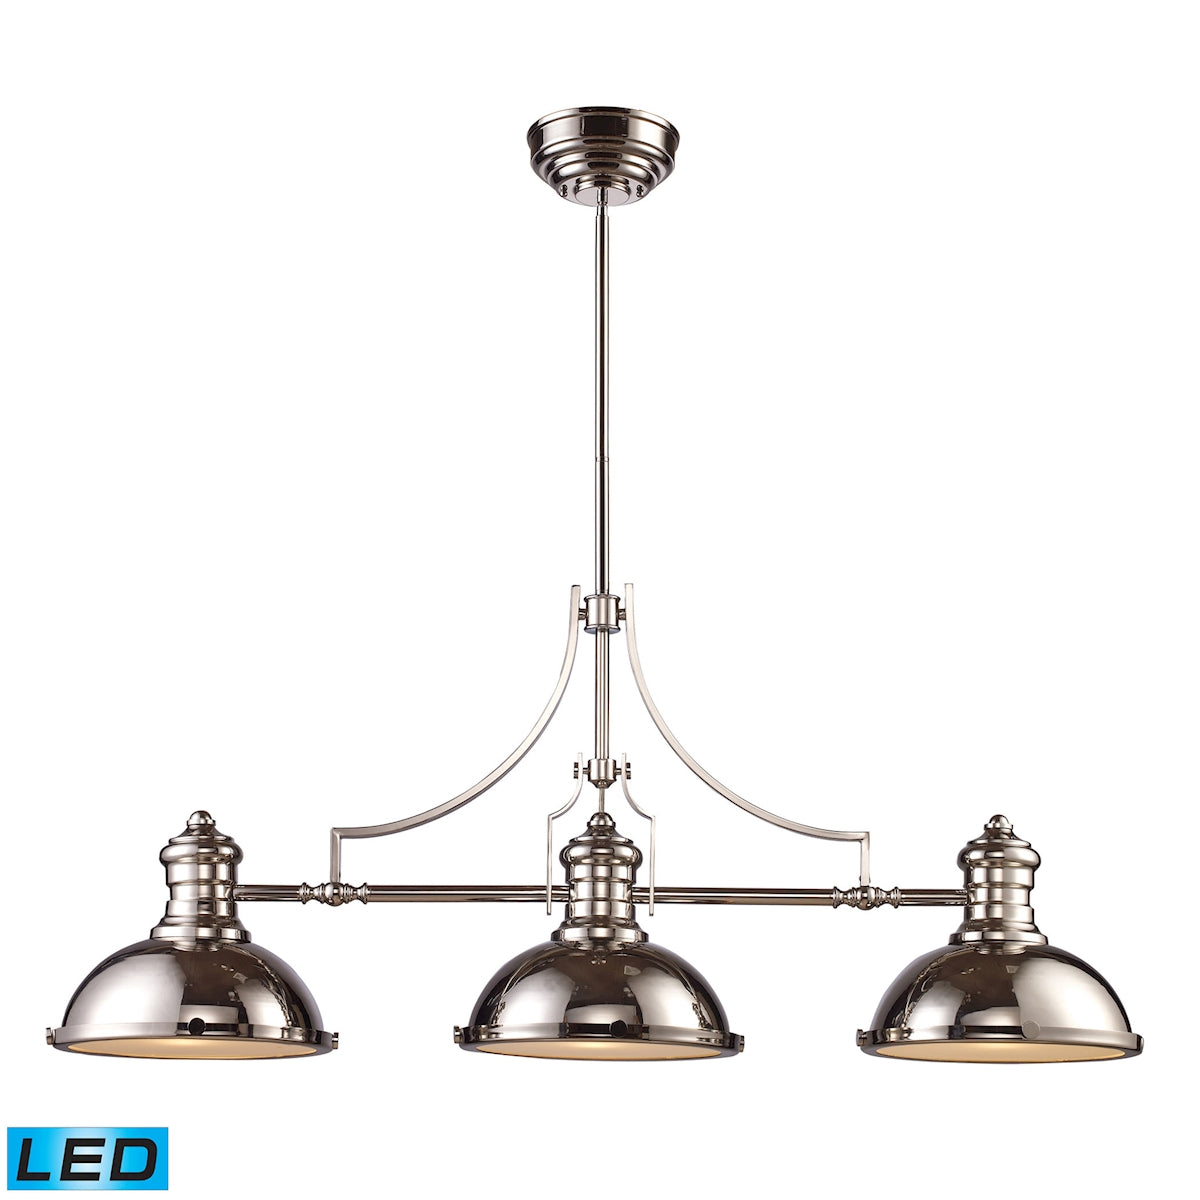 ELK Lighting 66115-3-LED Chadwick 3-Light Island Light in Polished Nickel with Matching Shades - Includes LED Bulbs